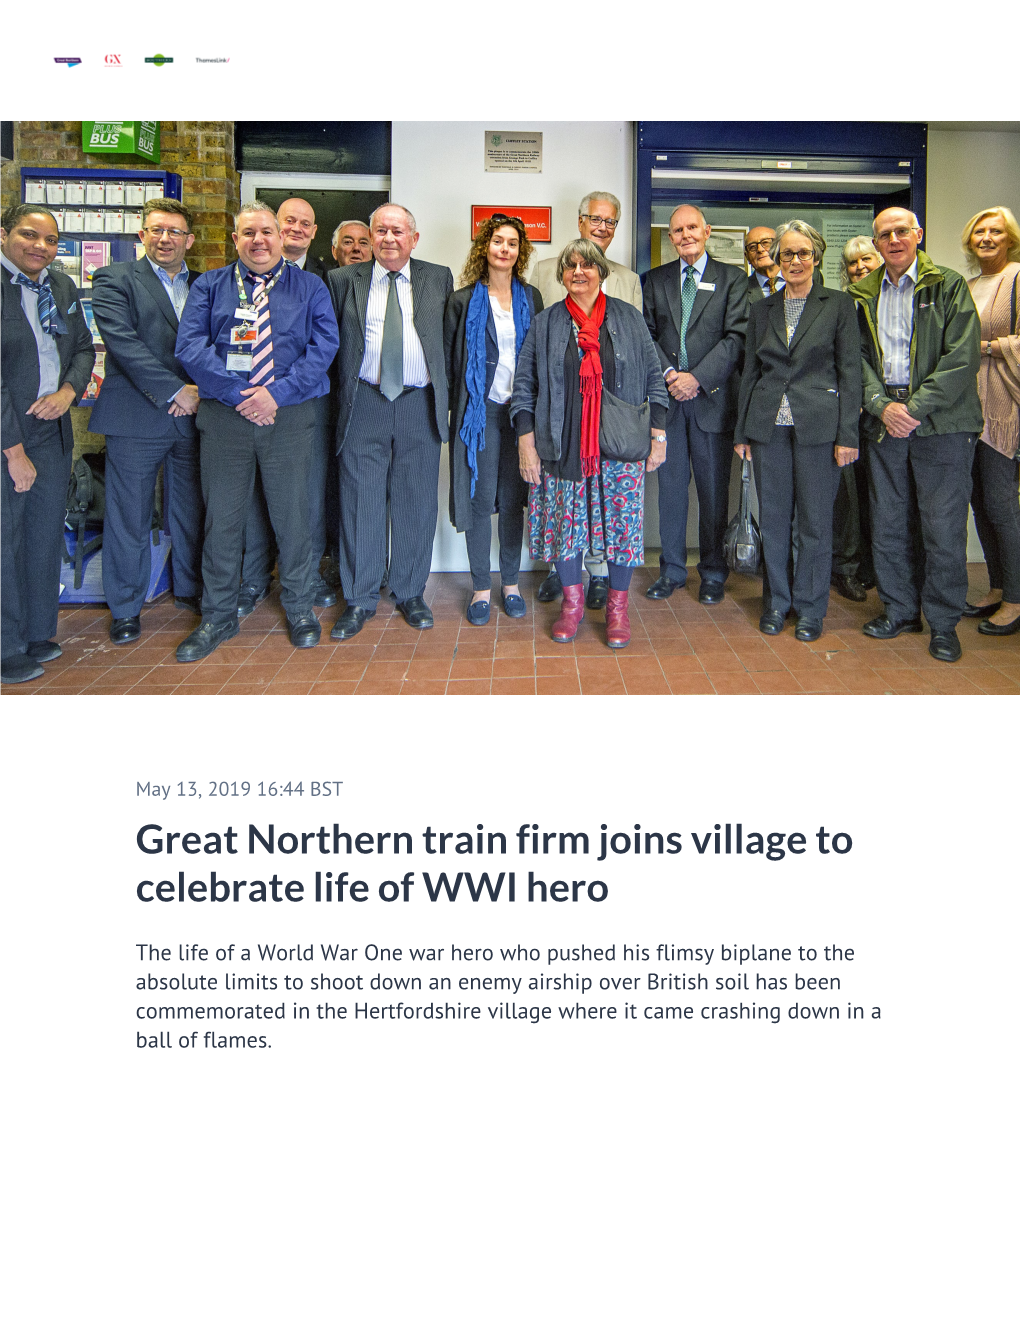 Great Northern Train Firm Joins Village to Celebrate Life of WWI Hero